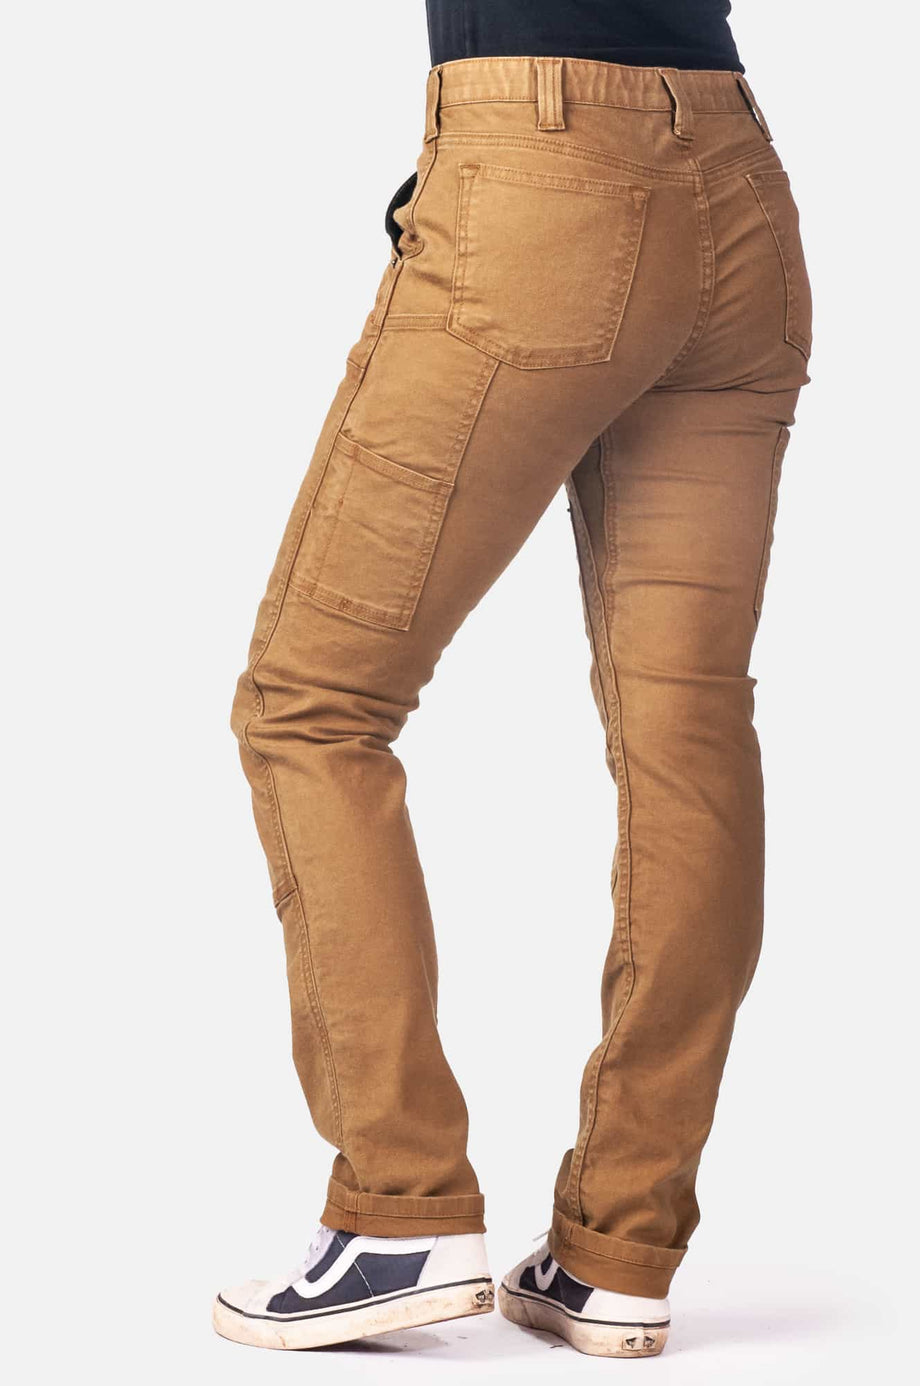 Maven X Pant in Saddle Brown Canvas, Womens Workwear